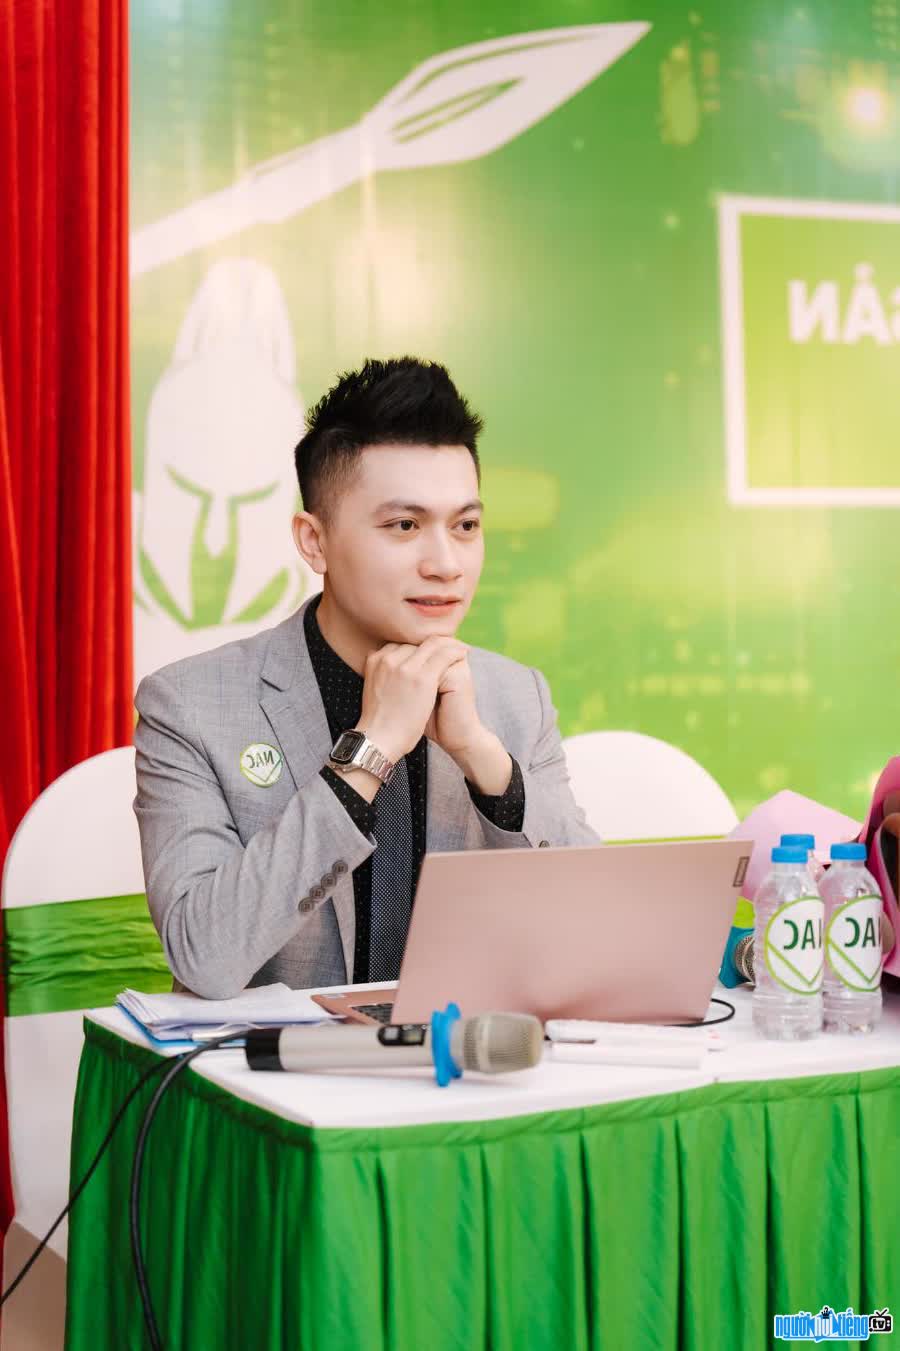 MC Dong Thoai was invited by many large companies to be MC of company events